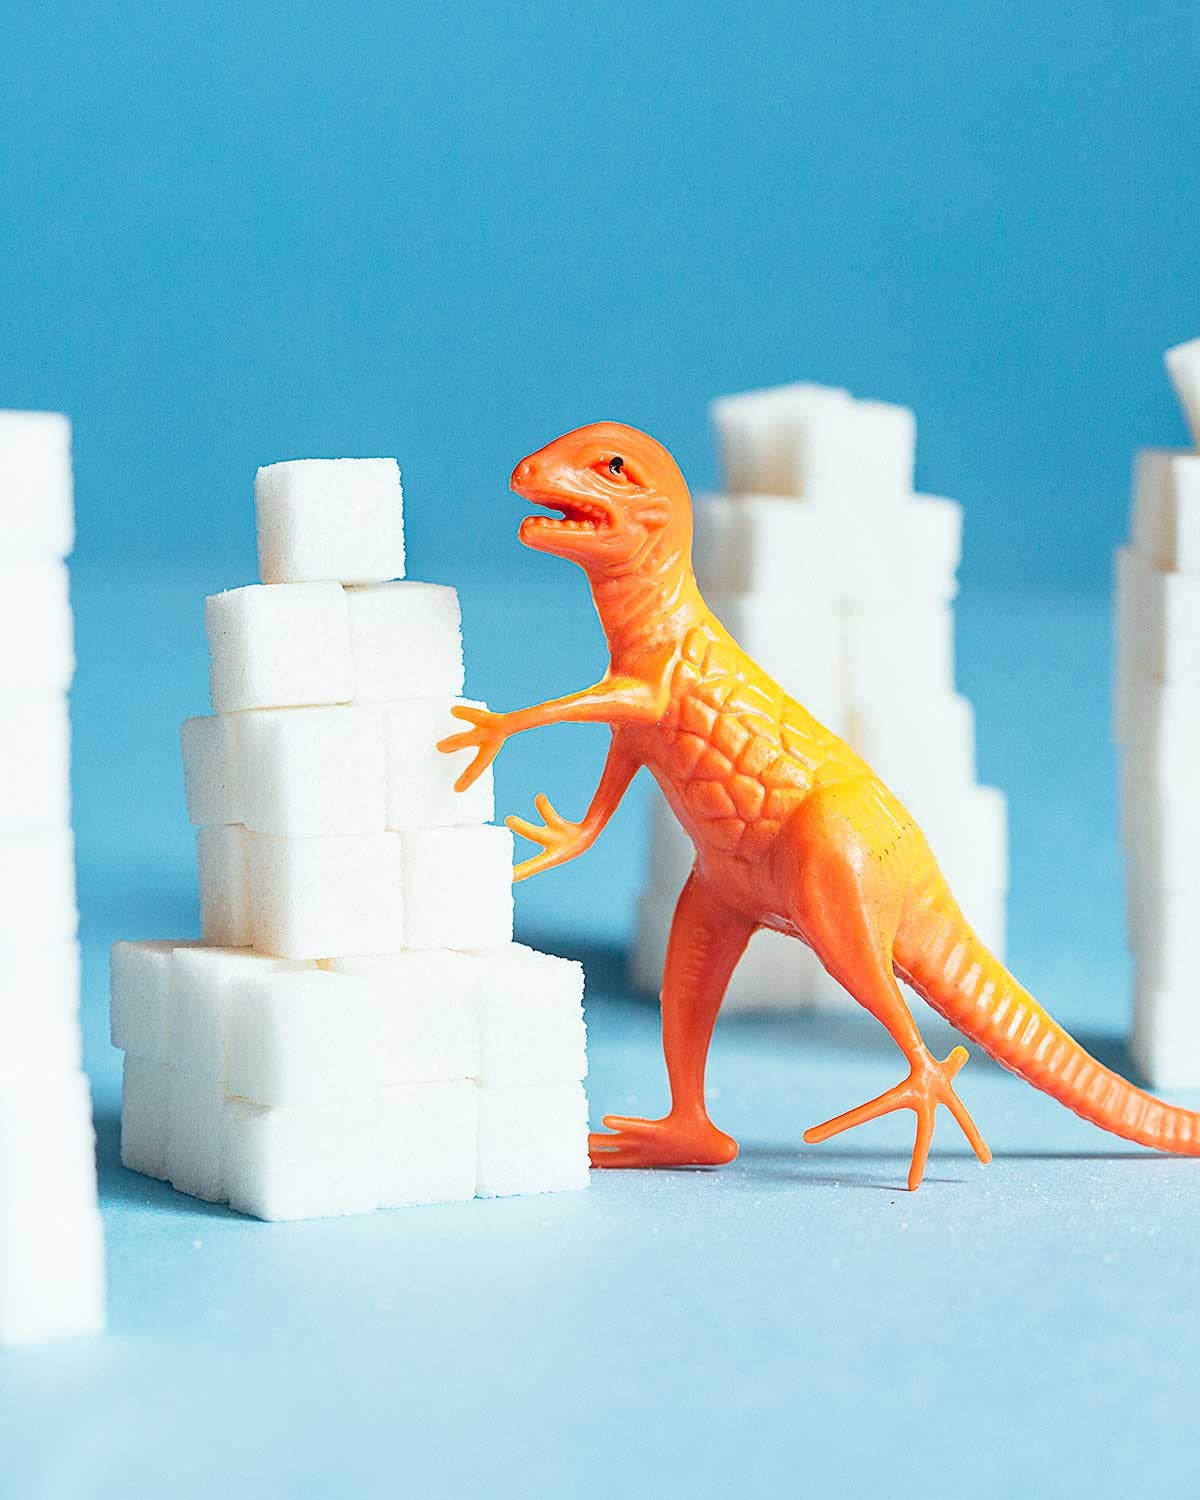 Gary Taubes on the Real Reason Sugar is Public Enemy Number One